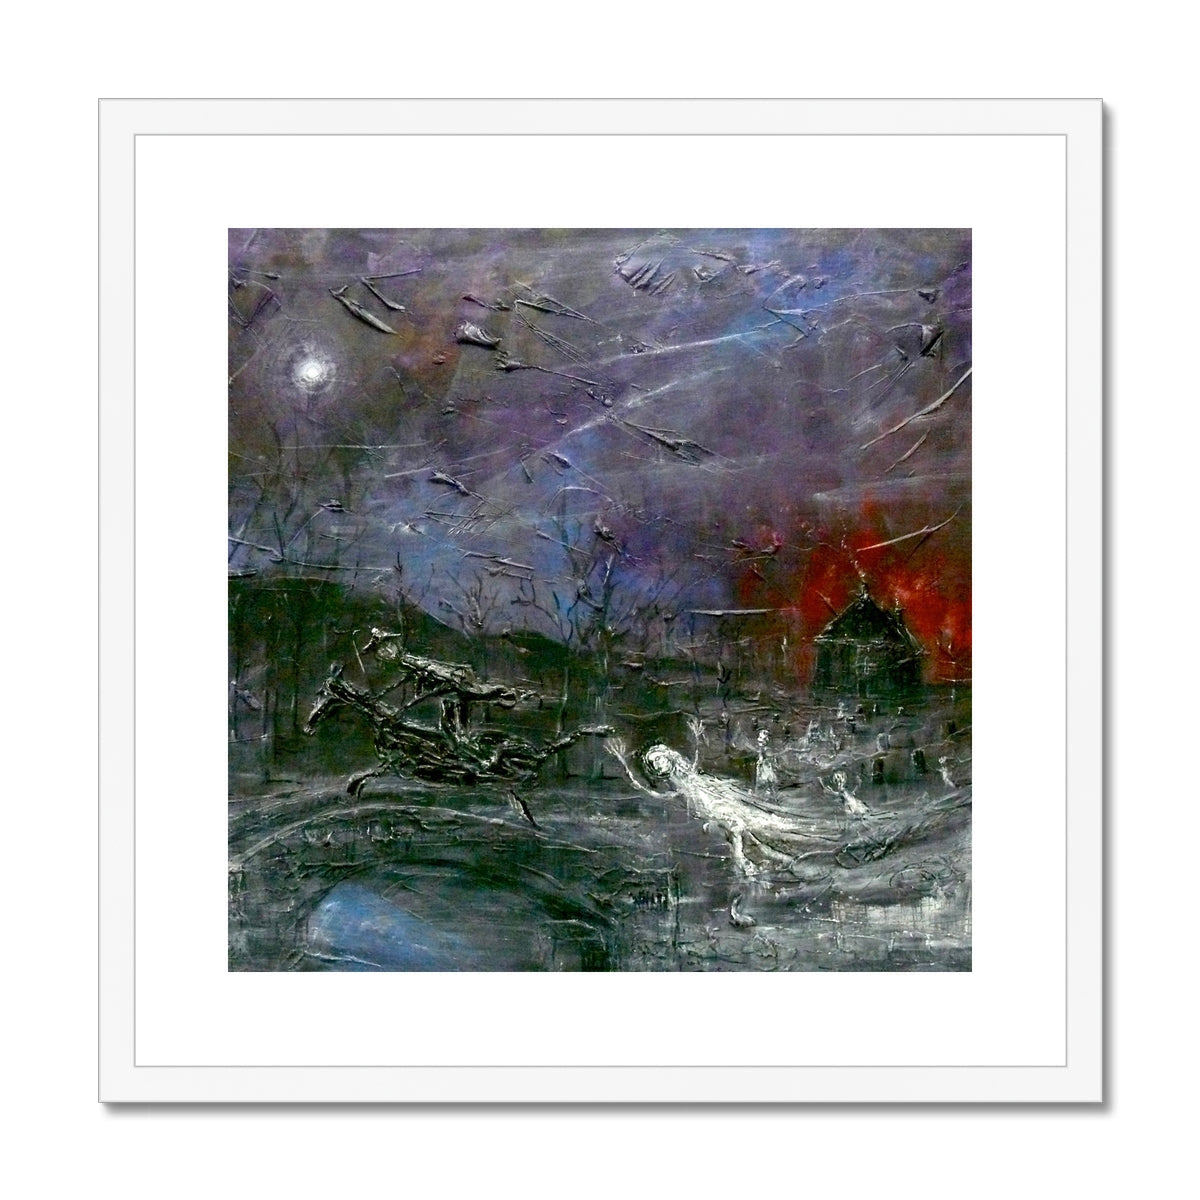 Tam O Shanter Painting | Framed & Mounted Prints From Scotland-Framed & Mounted Prints-Abstract & Impressionistic Art Gallery-20"x20"-White Frame-Paintings, Prints, Homeware, Art Gifts From Scotland By Scottish Artist Kevin Hunter